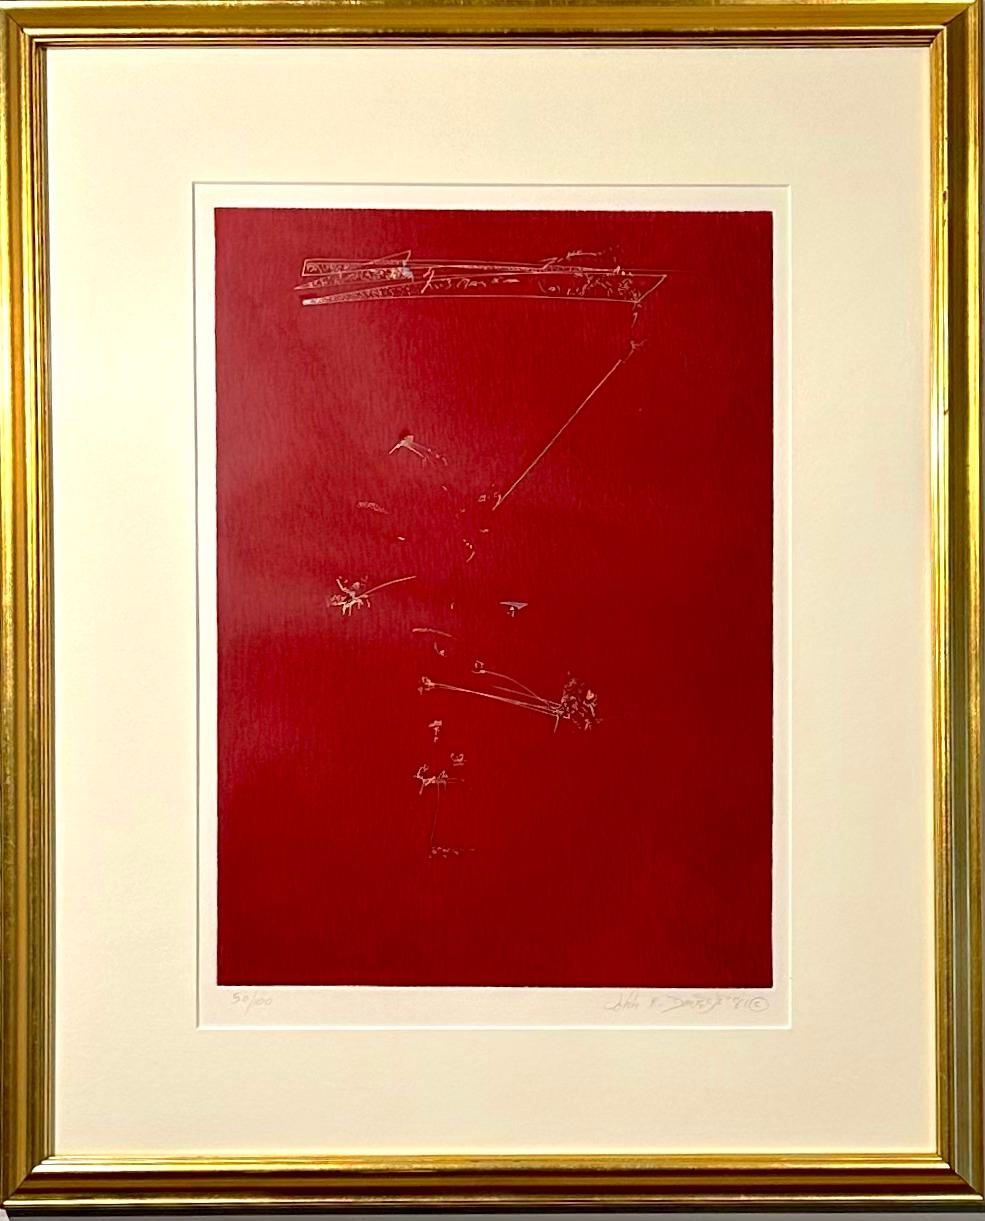 Minimal composition in red with hand-colored abstract markings connoting music and dance. One of 4 prints from the Philadelphia Portfolio prepared by the Print Center in partnership with the City of Philadelphia, 1981. #50/100. Signed, dated, and